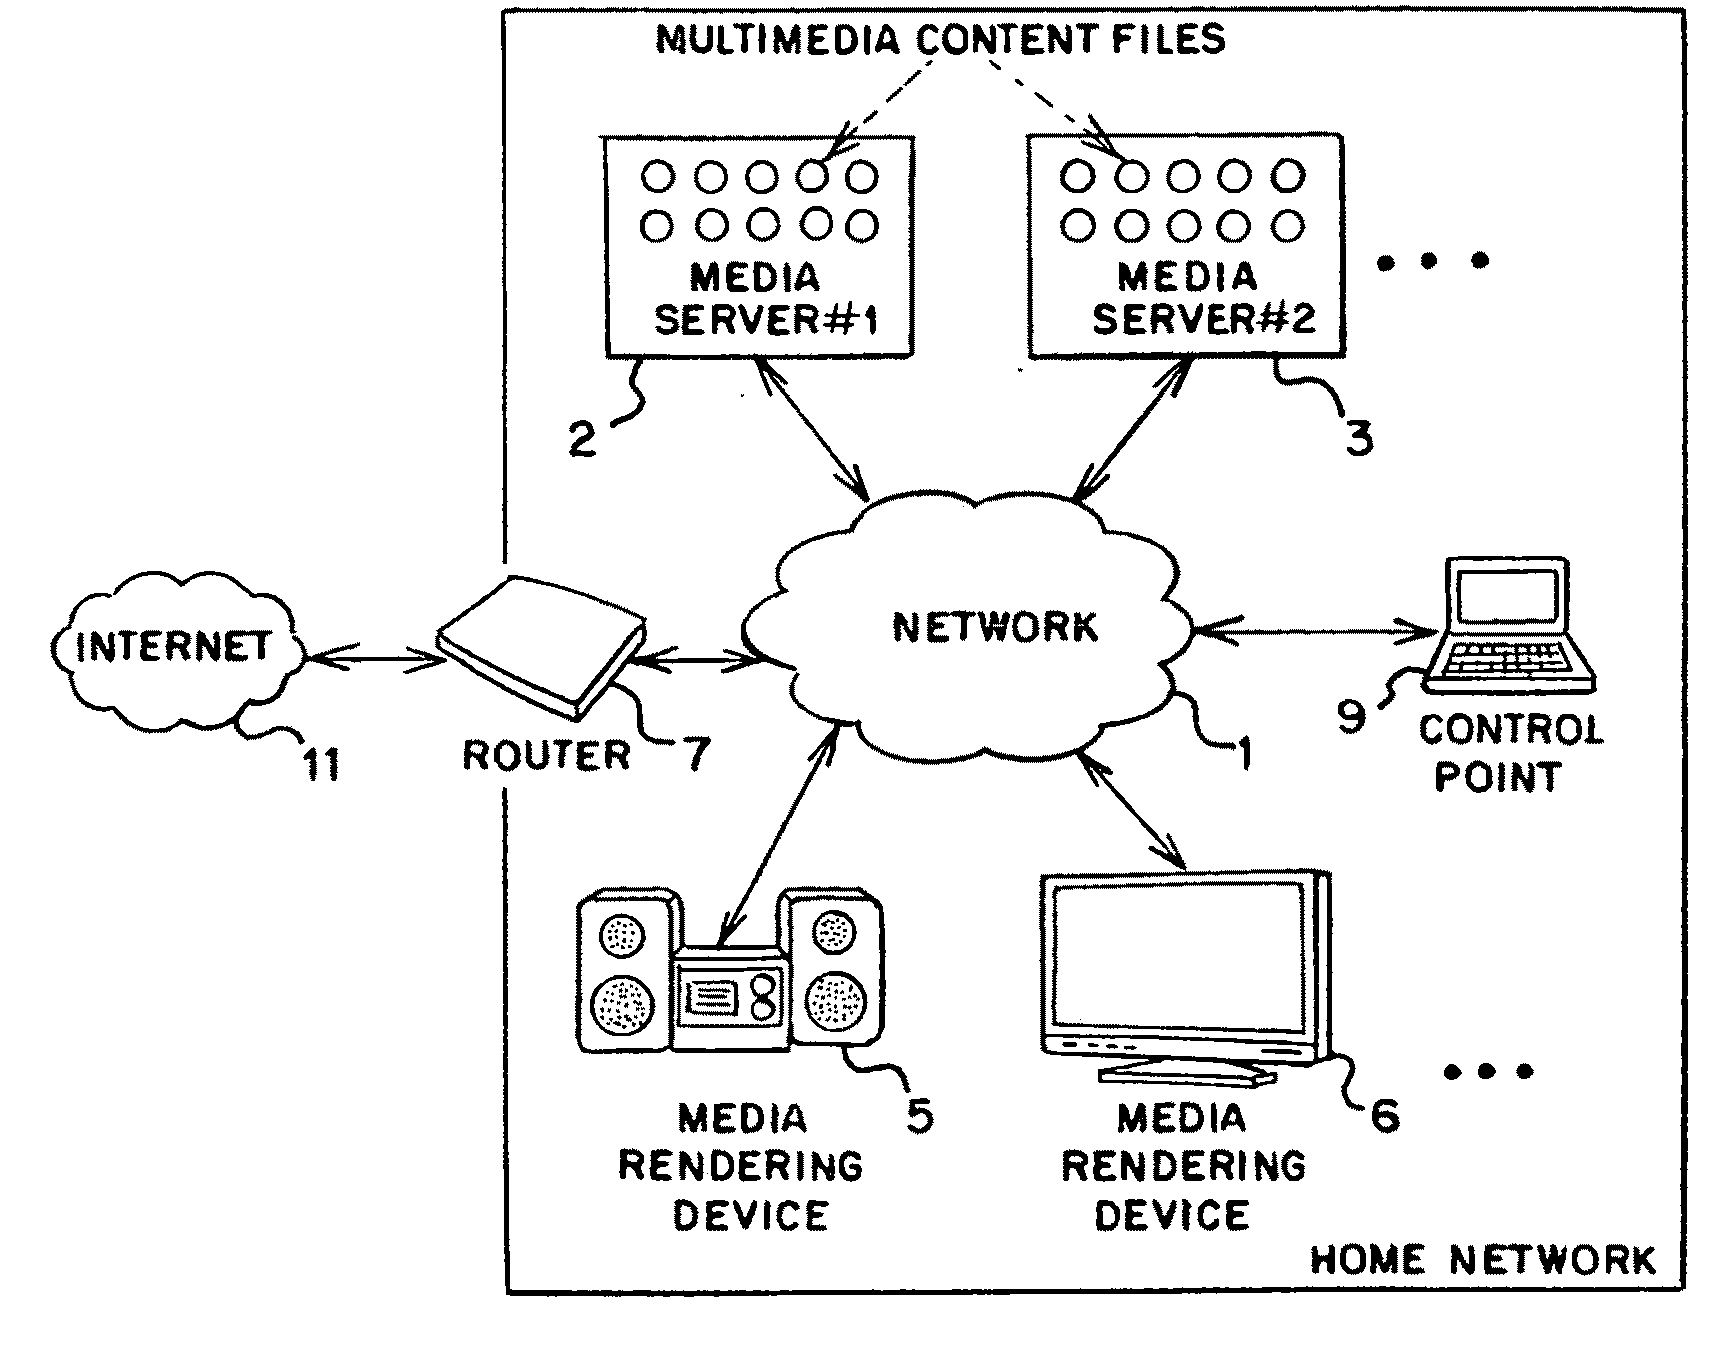 System and method for controlling media rendering in a network using a mobile device